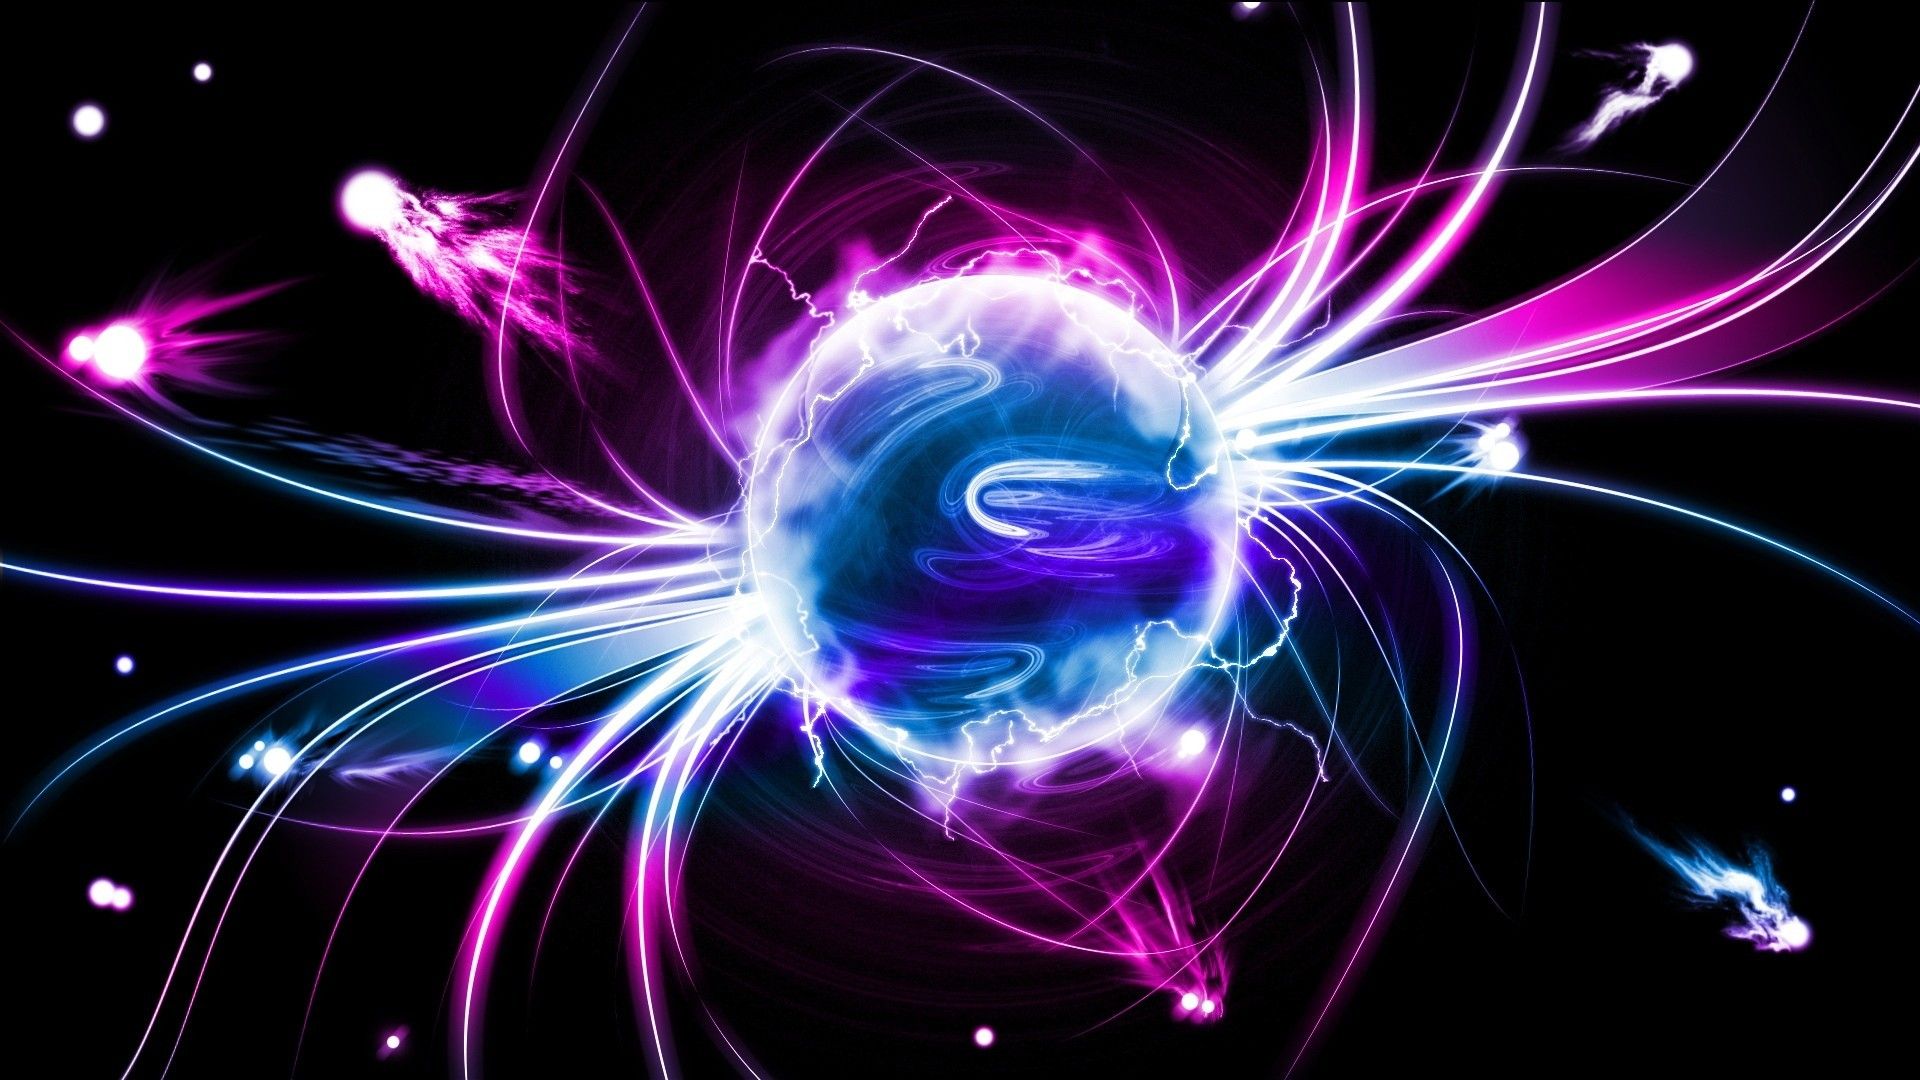 Planes Resolution View Burning Purple Space Cute Wallpapers HD Pics |